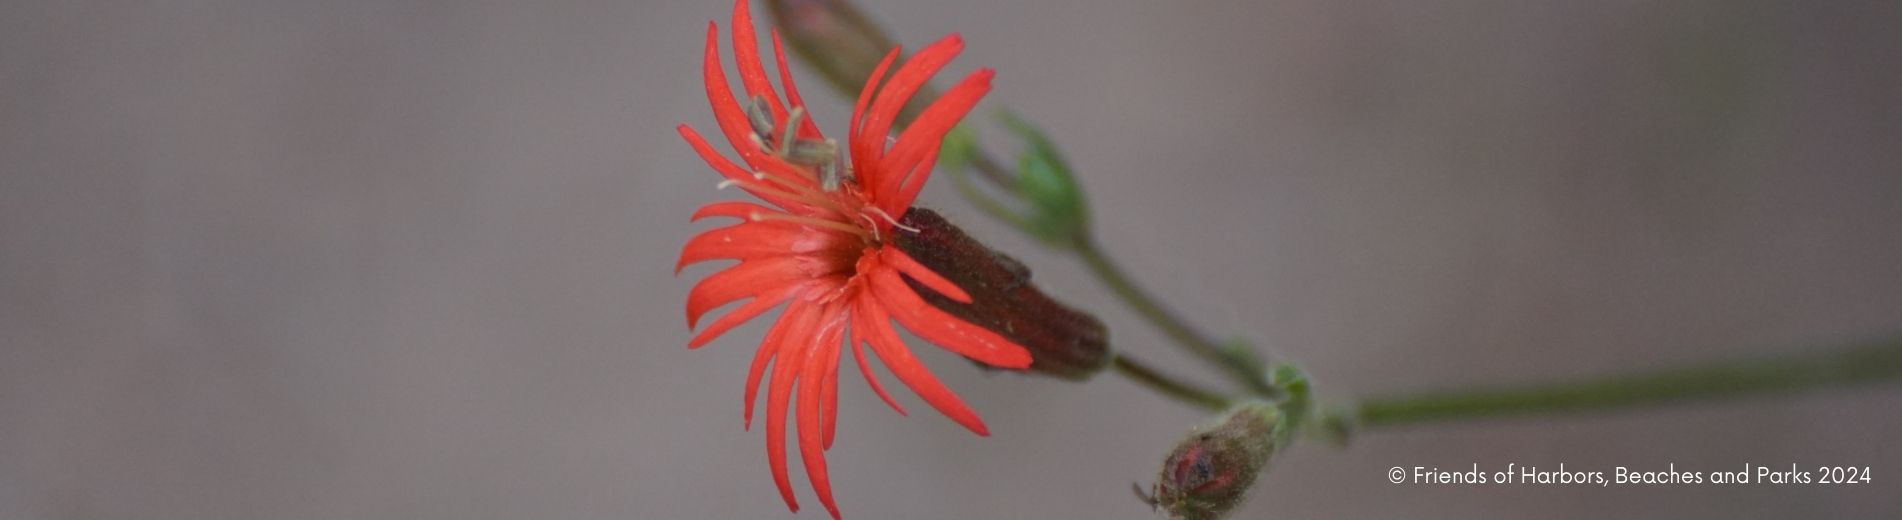 Fringed Indian Pink- bright red flower with fringed petals, close up single flower